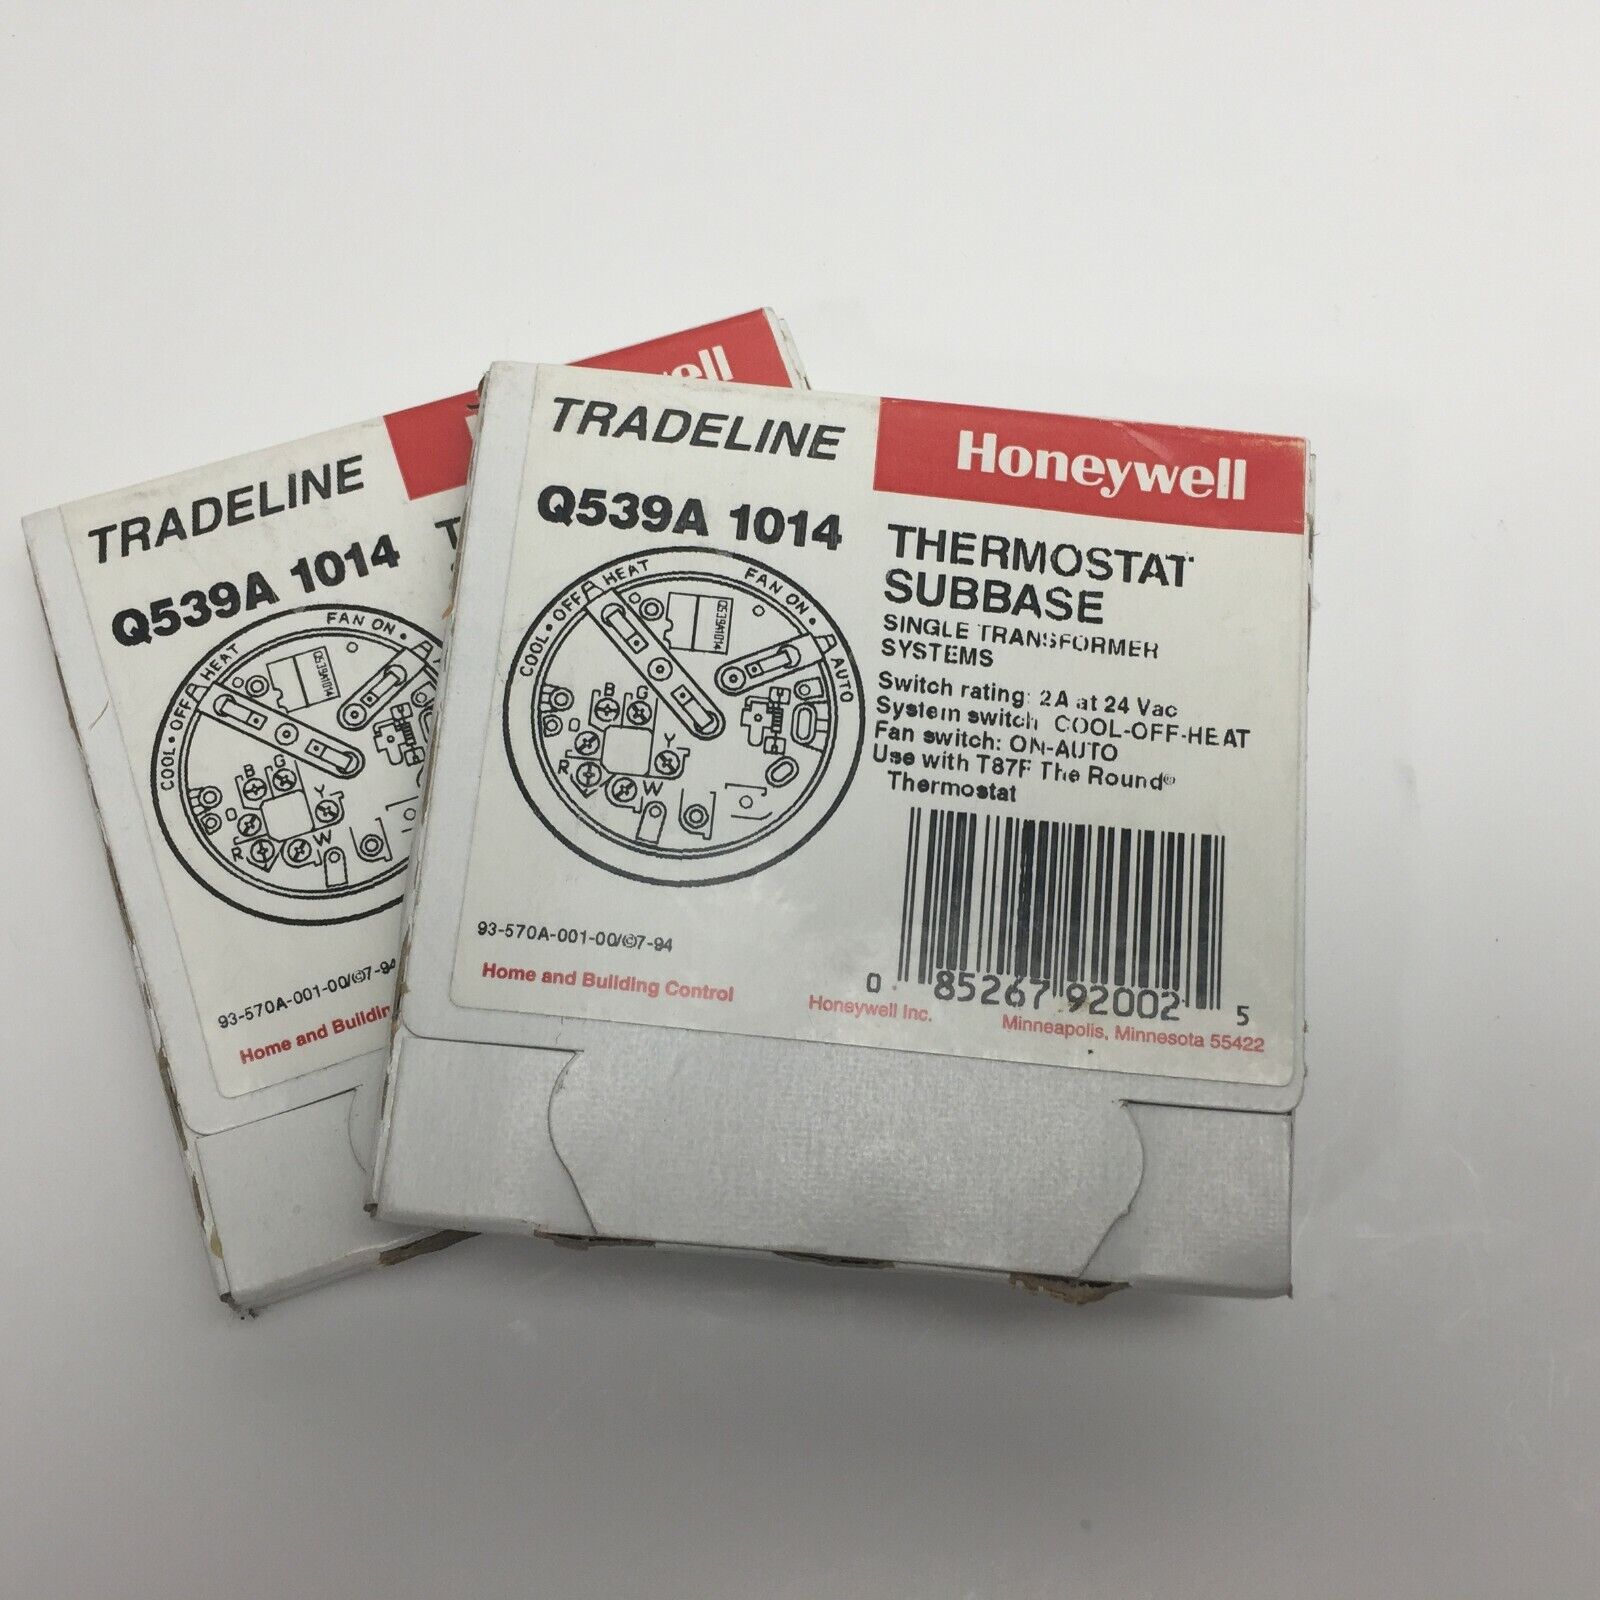 2 New In Box Honeywell Sub-base for the "ROUND" Thermostat Q539A 1014 Honeywell Q539A 1014